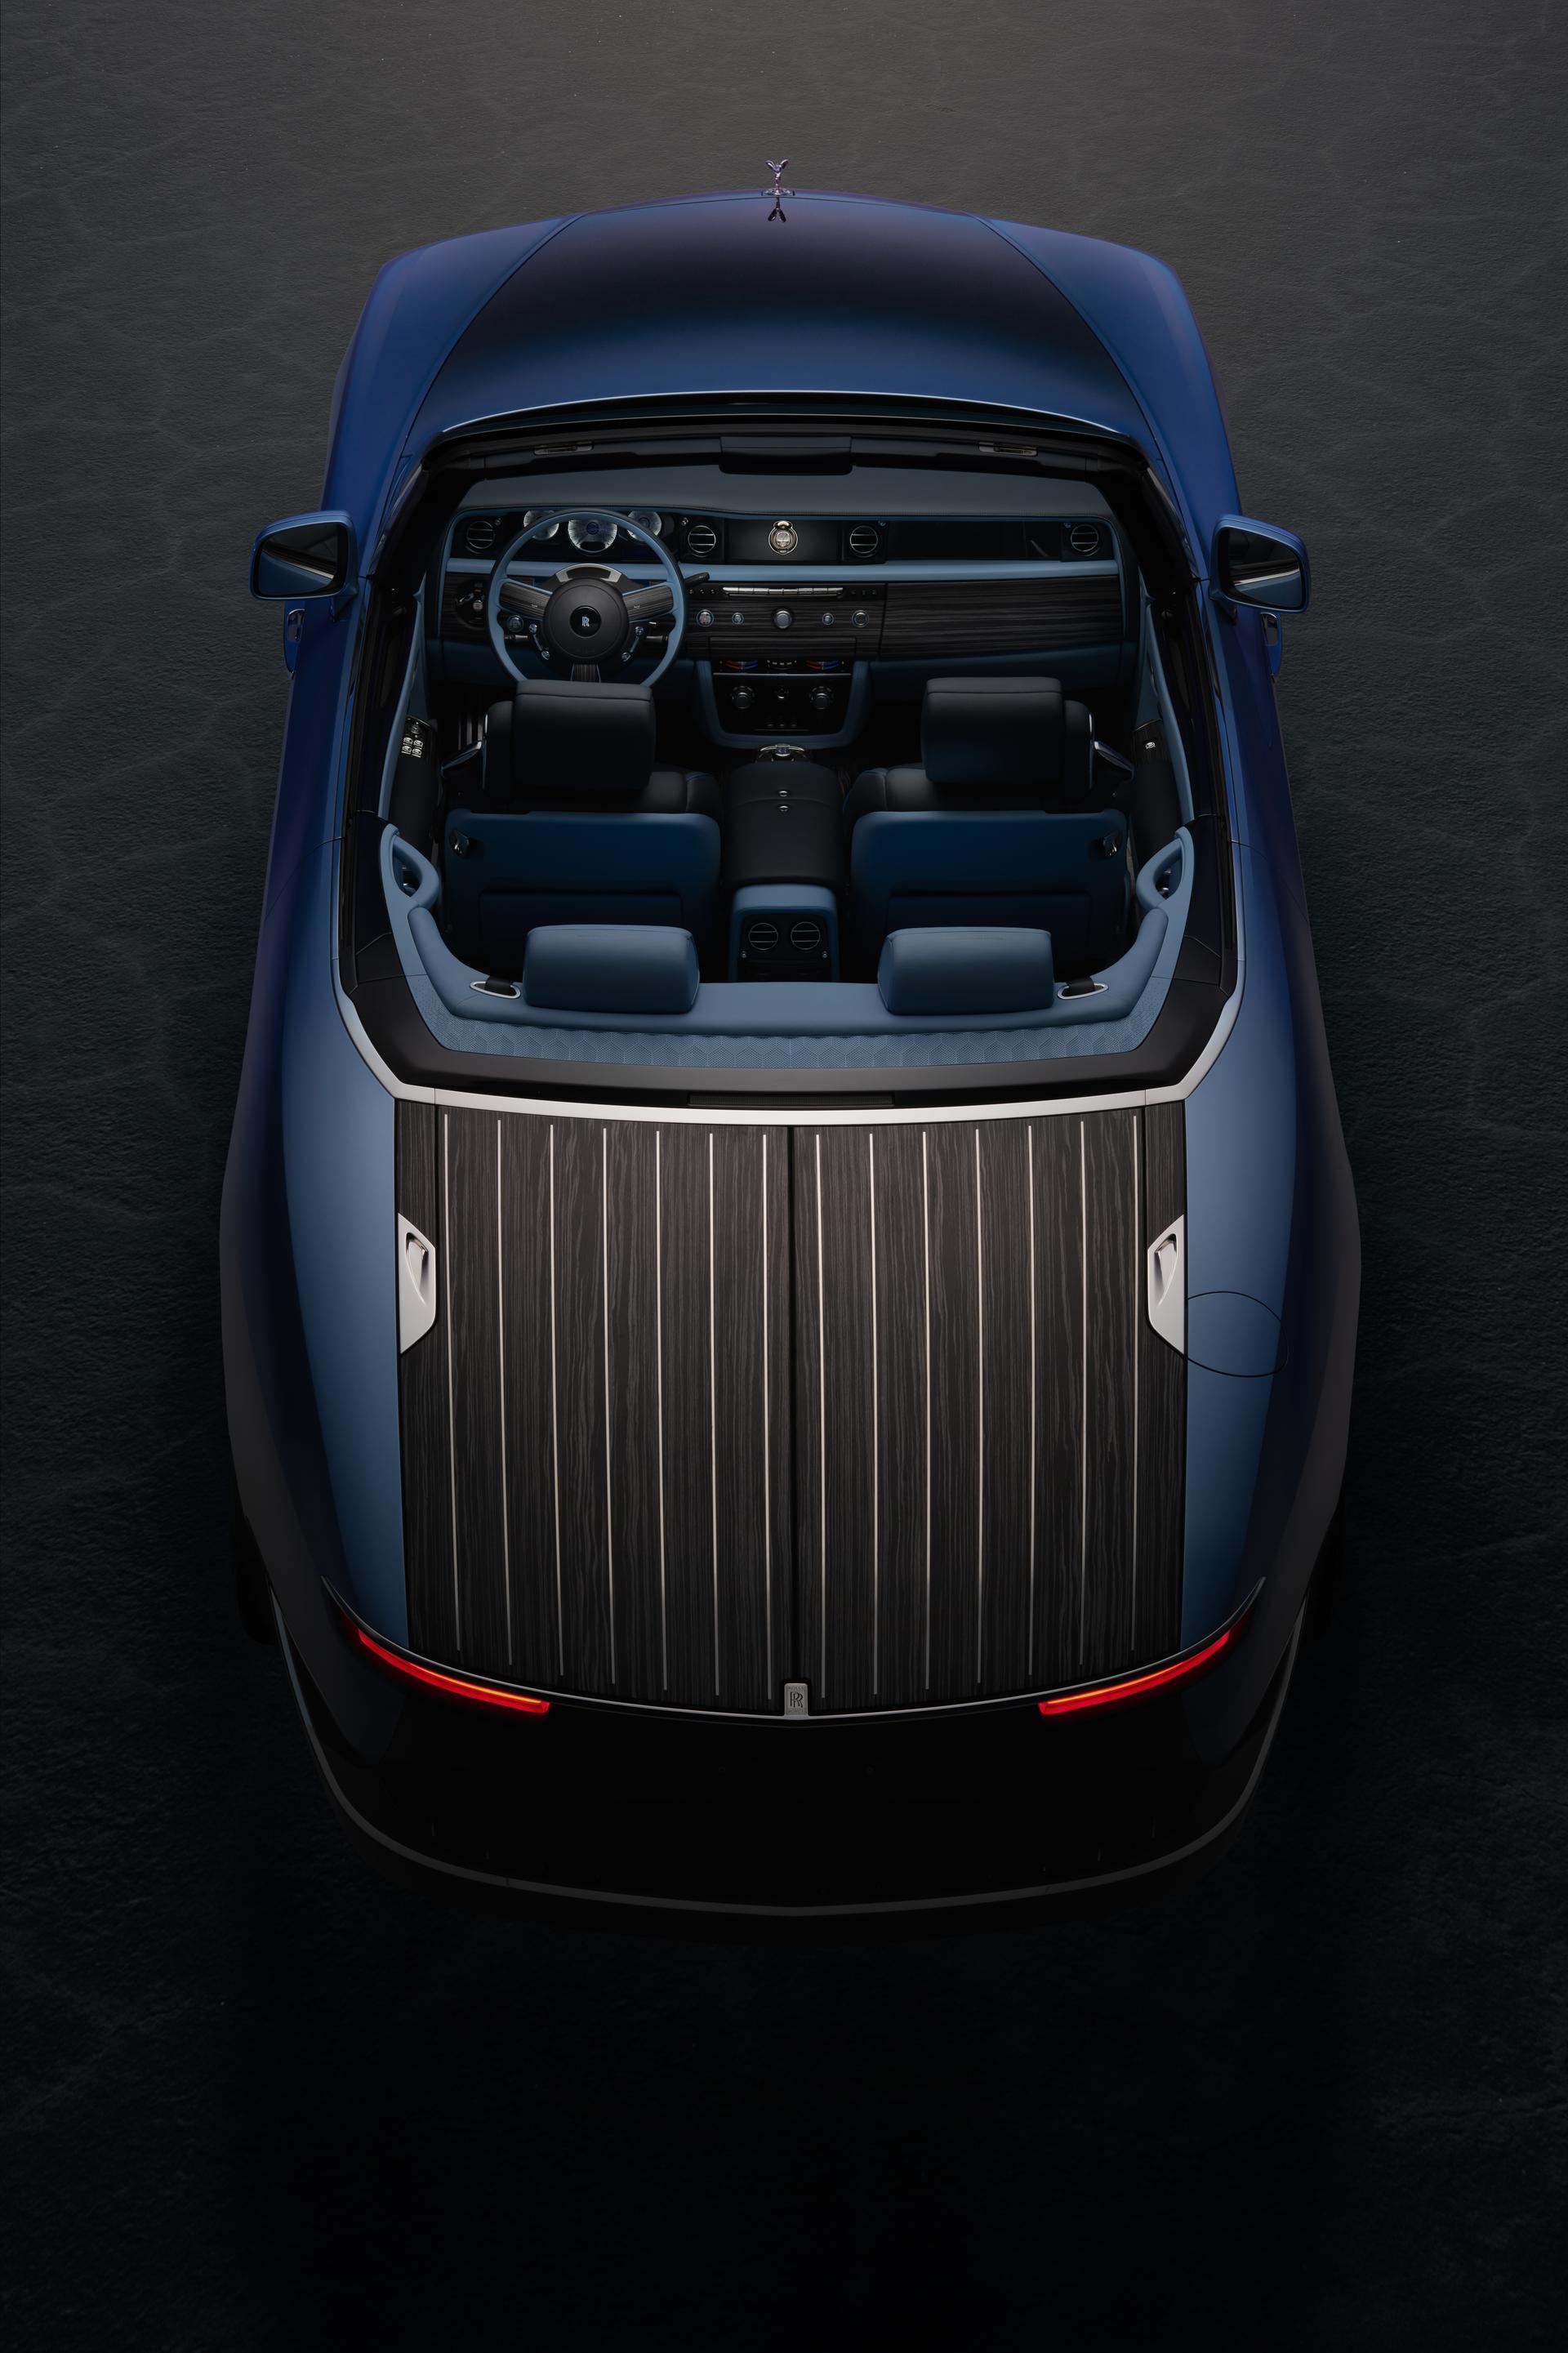 The nearly $30M coachbuilt Rolls-Royce Boat Tail